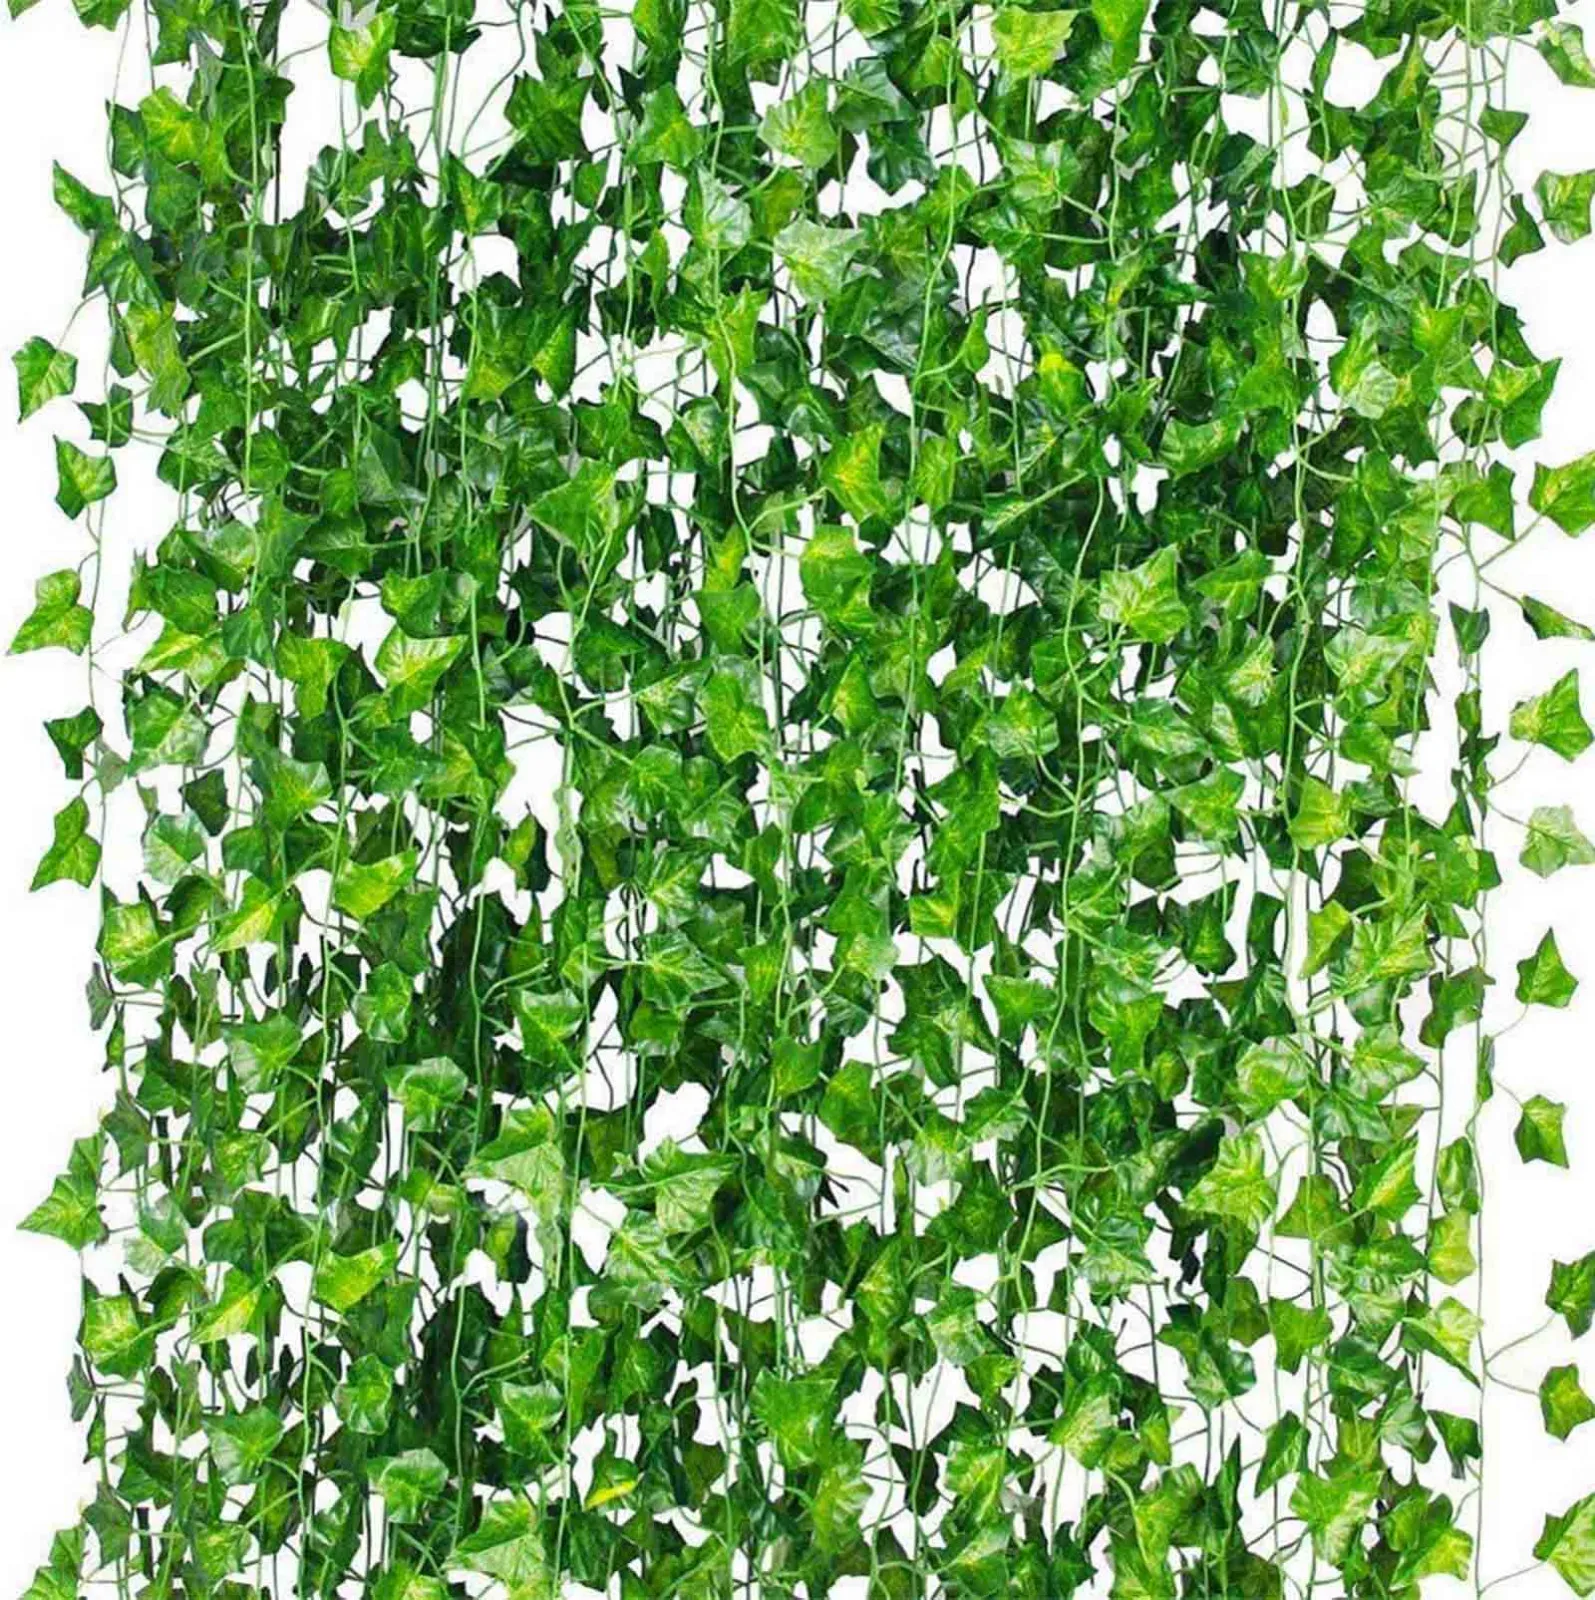 

12 Strands 86 Ft Hanging Plant Creepers Leaf Vines Decoration Artificial Lianas Fake Lvy Garland Wedding Party Room Garden Decor